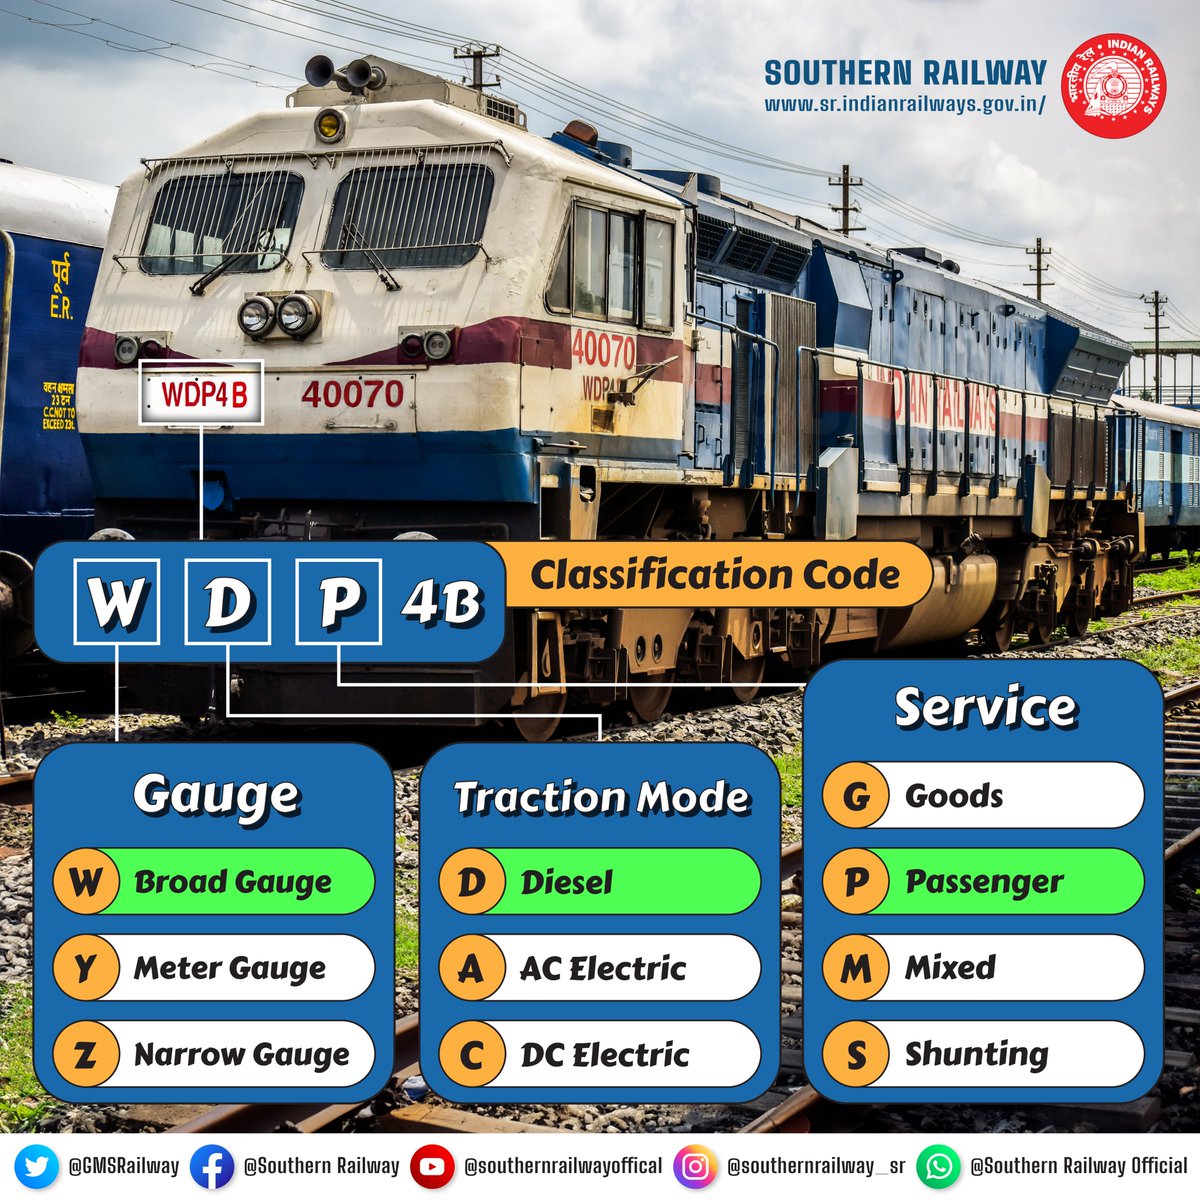 Let's crack the code and unlock the secrets behind this powerful machine! Each letter holds a key detail about this workhorse of the #IndianRailways. #KnowYourLocomotive